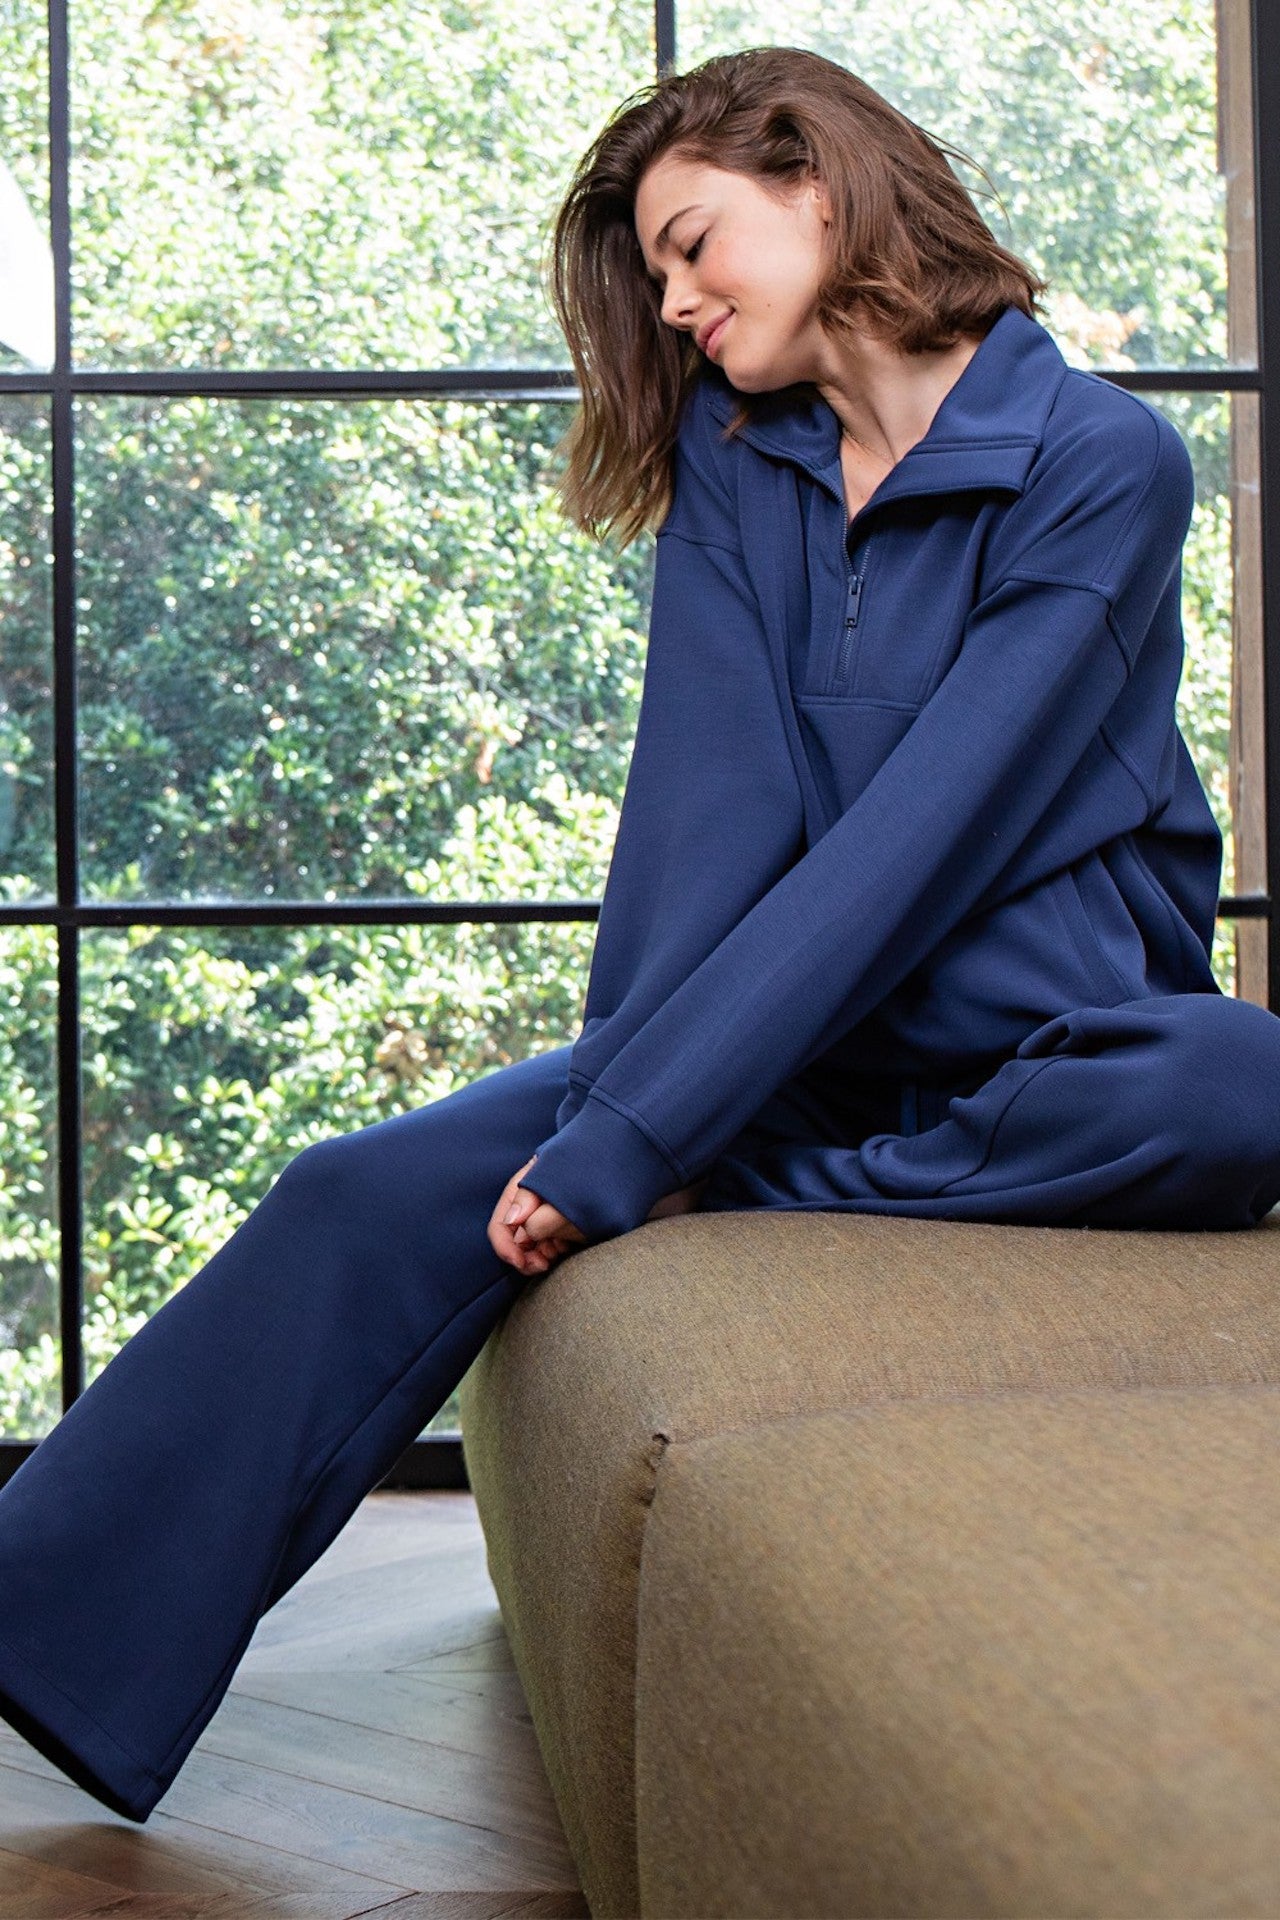 blue modal poly span sweatpants with pockets and an elastic waistband